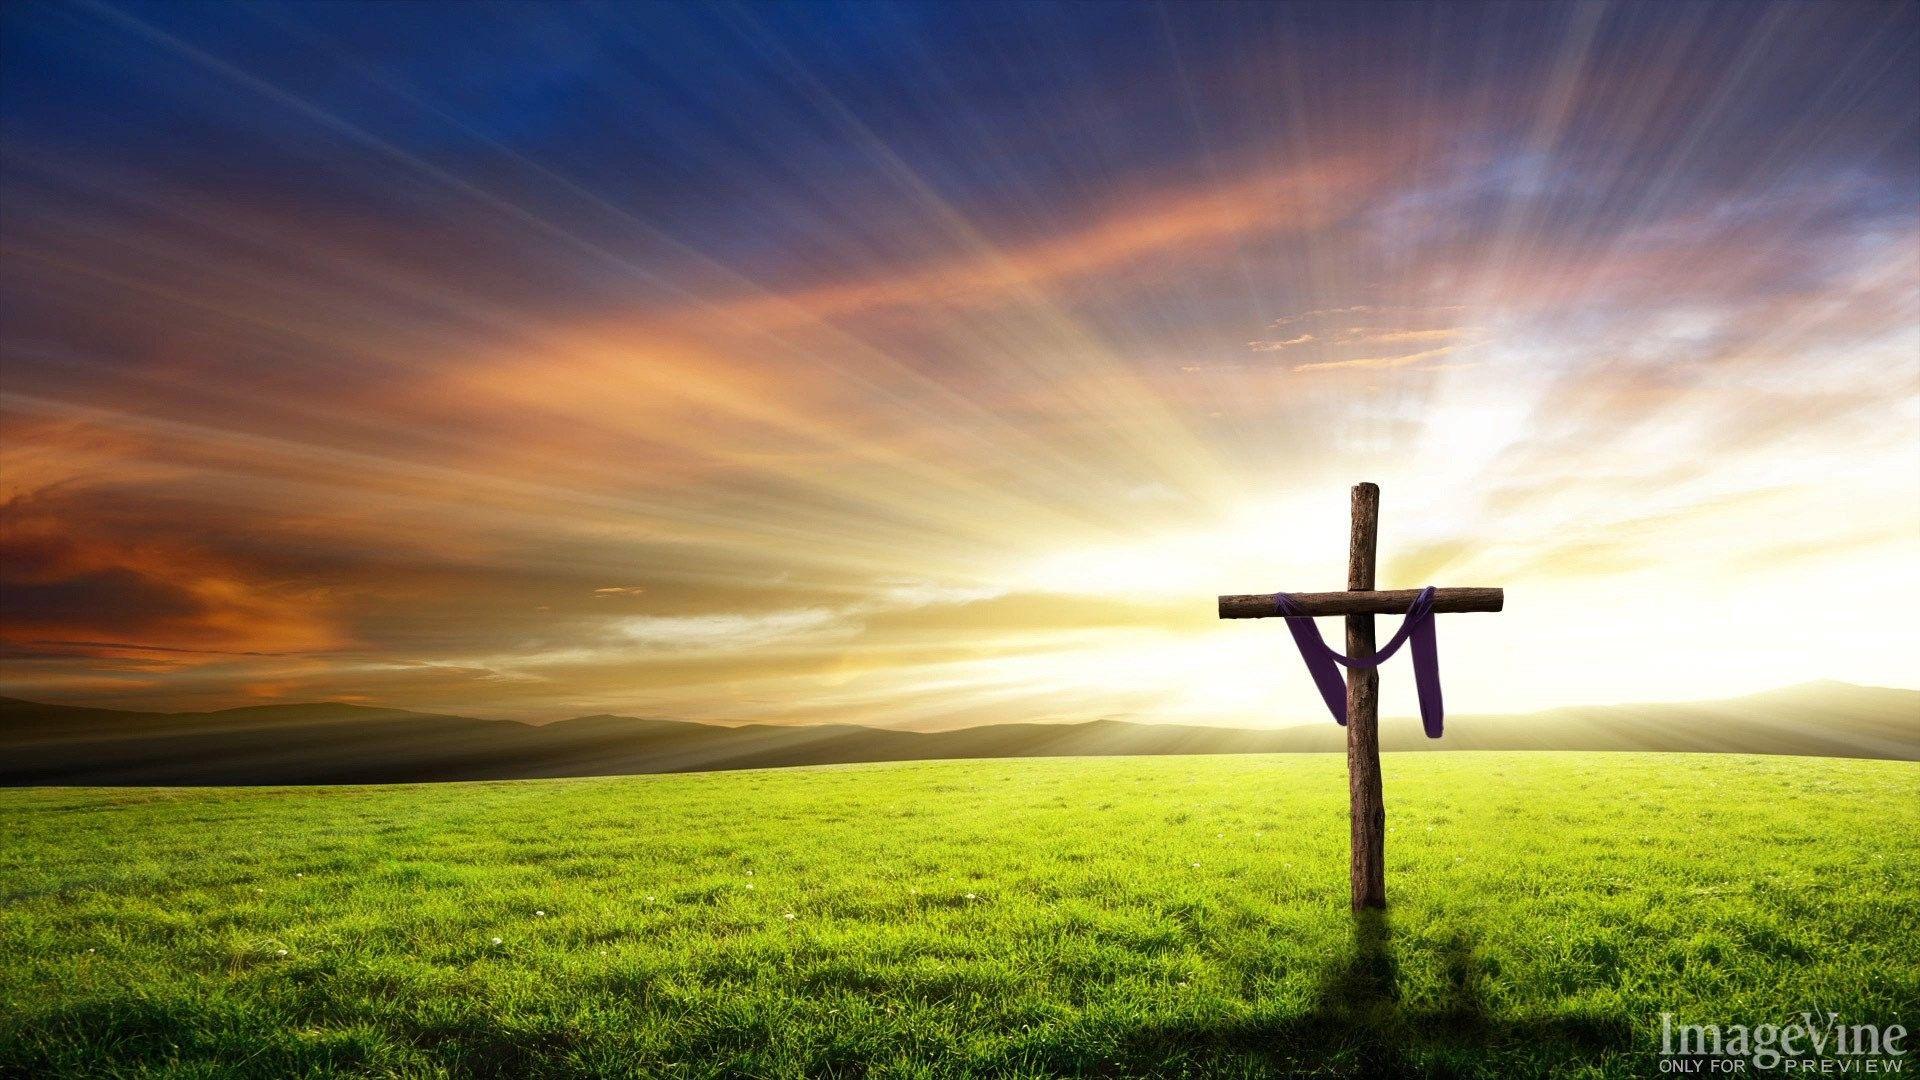 Religious Easter S wallpaper in 1024x768 resolution